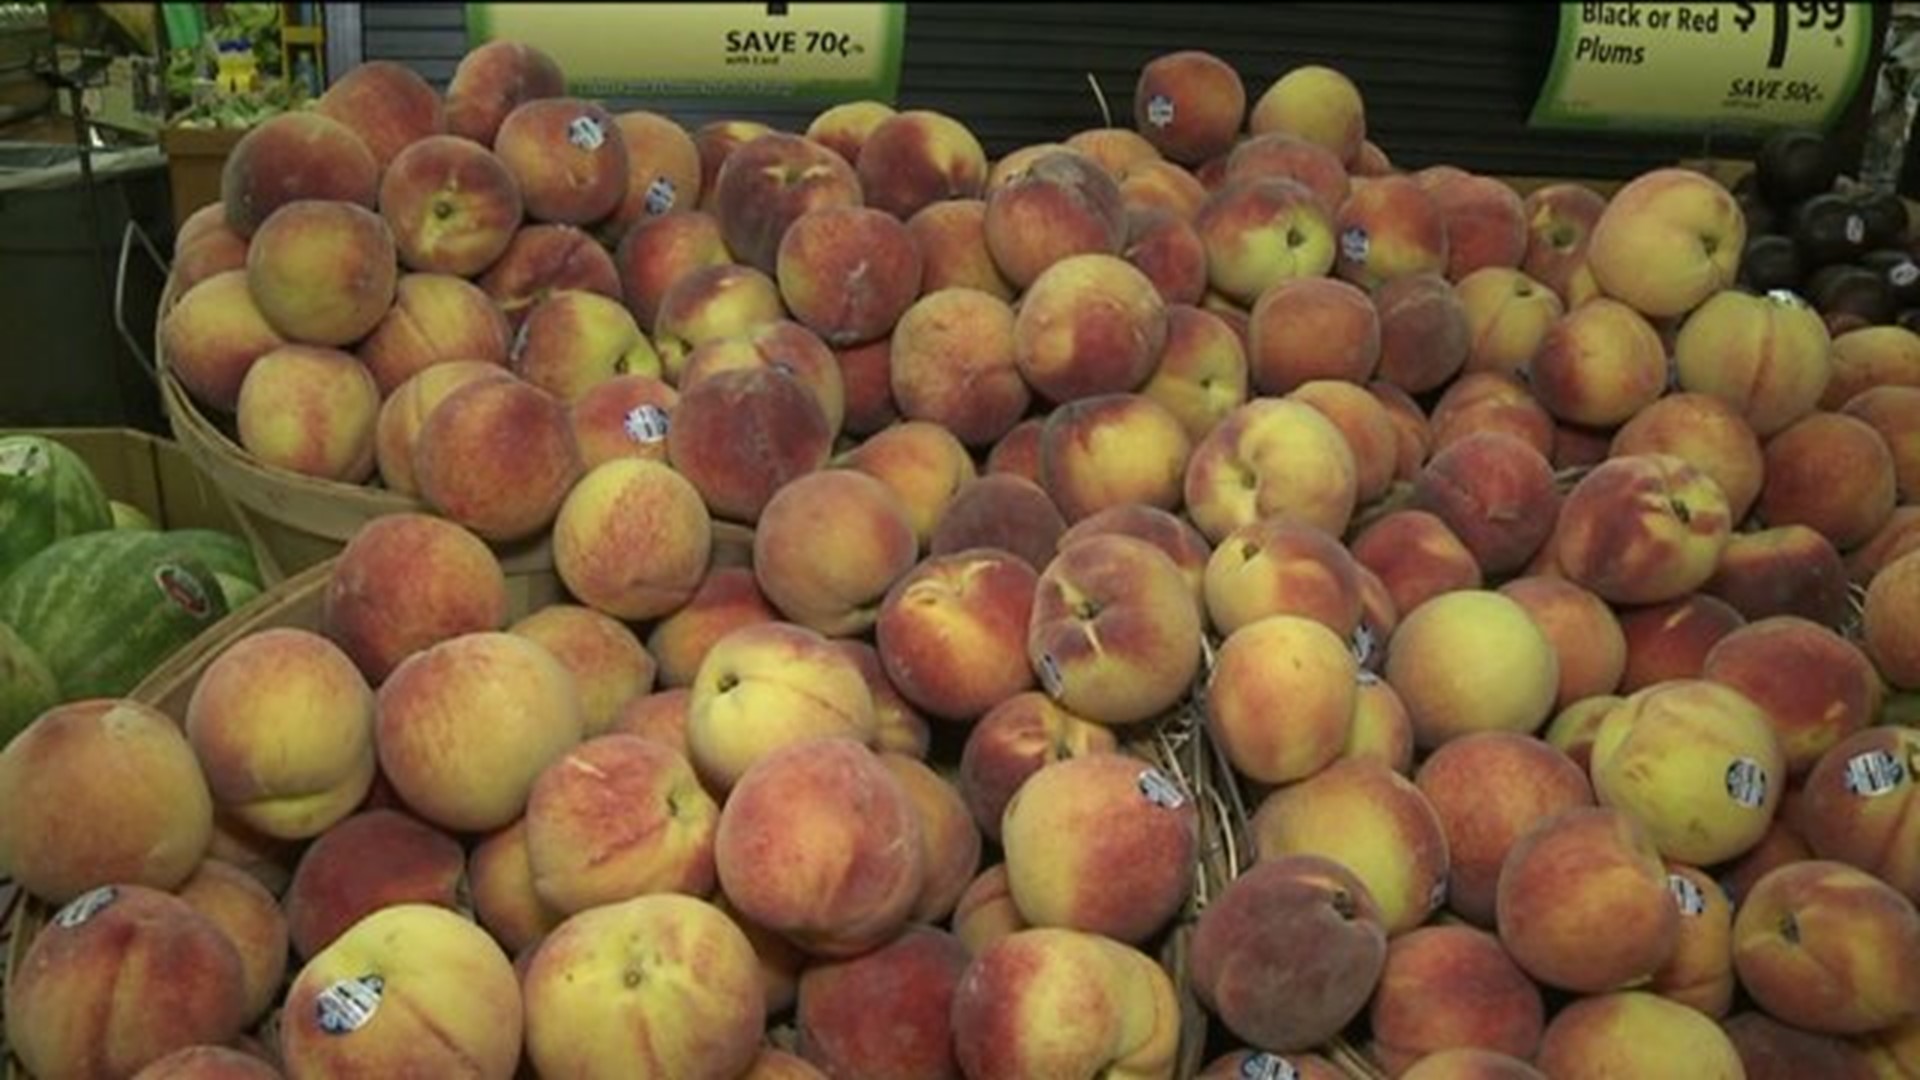 Recalled Fruit In Our Area